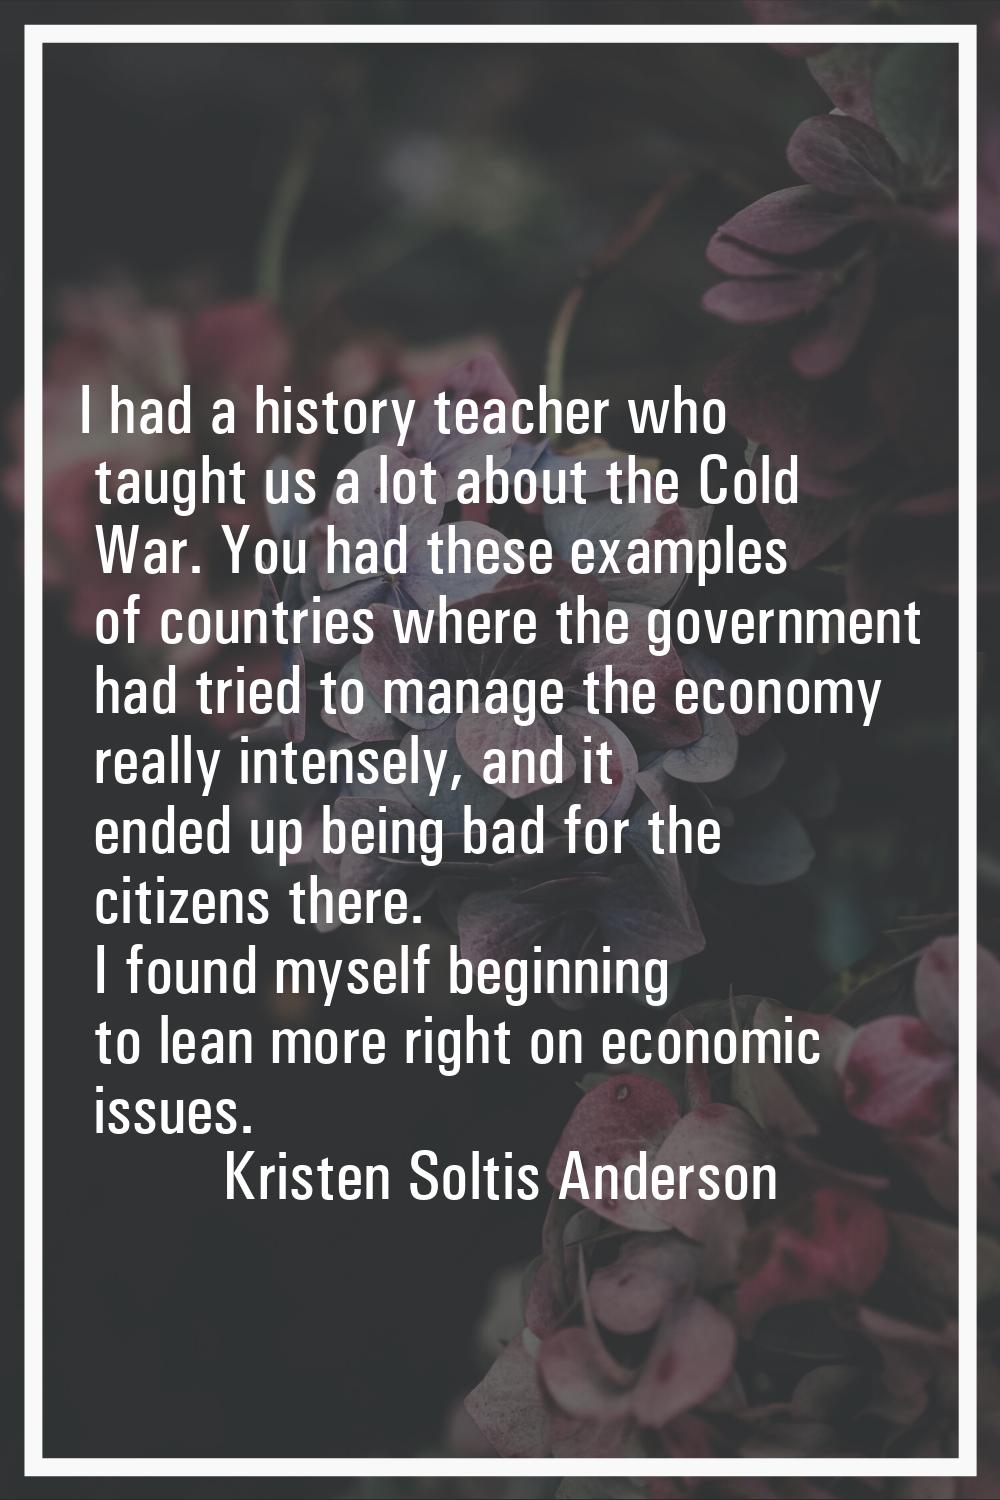 I had a history teacher who taught us a lot about the Cold War. You had these examples of countries